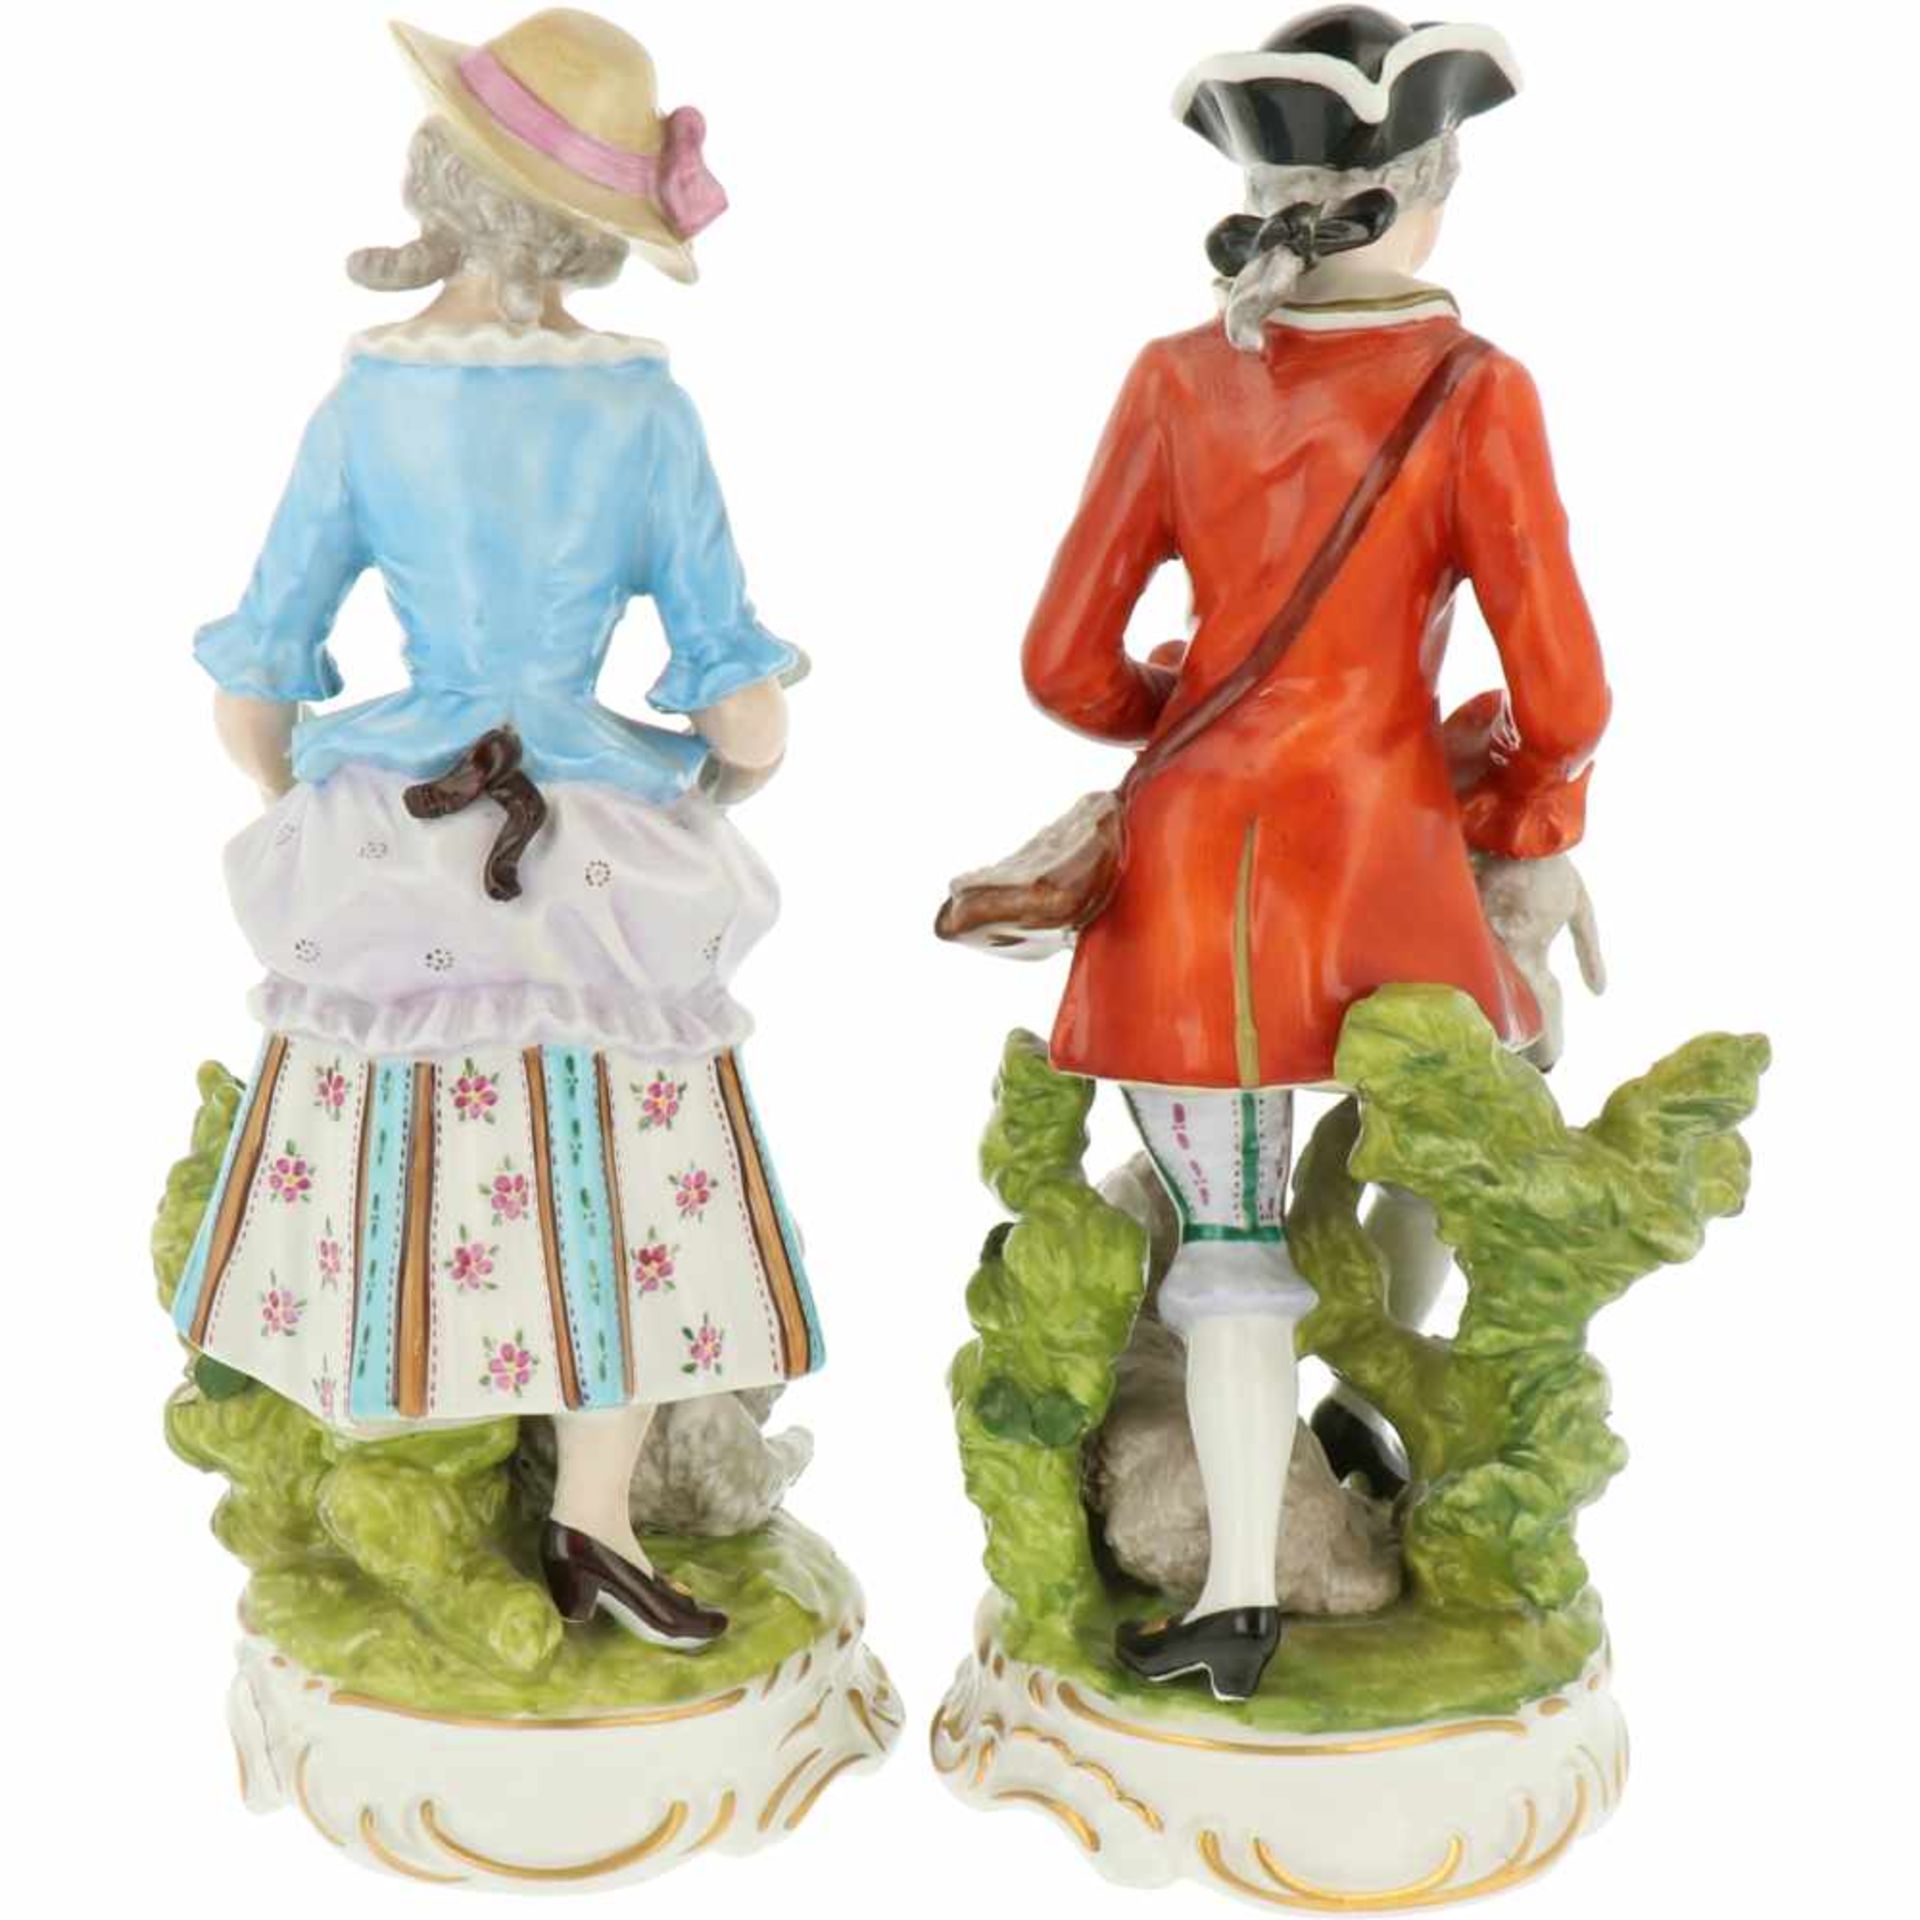 A set of procelain figurines of a lady and a gentleman with goats. Volkstedt-Rudolstadt, Germany. - Bild 2 aus 7